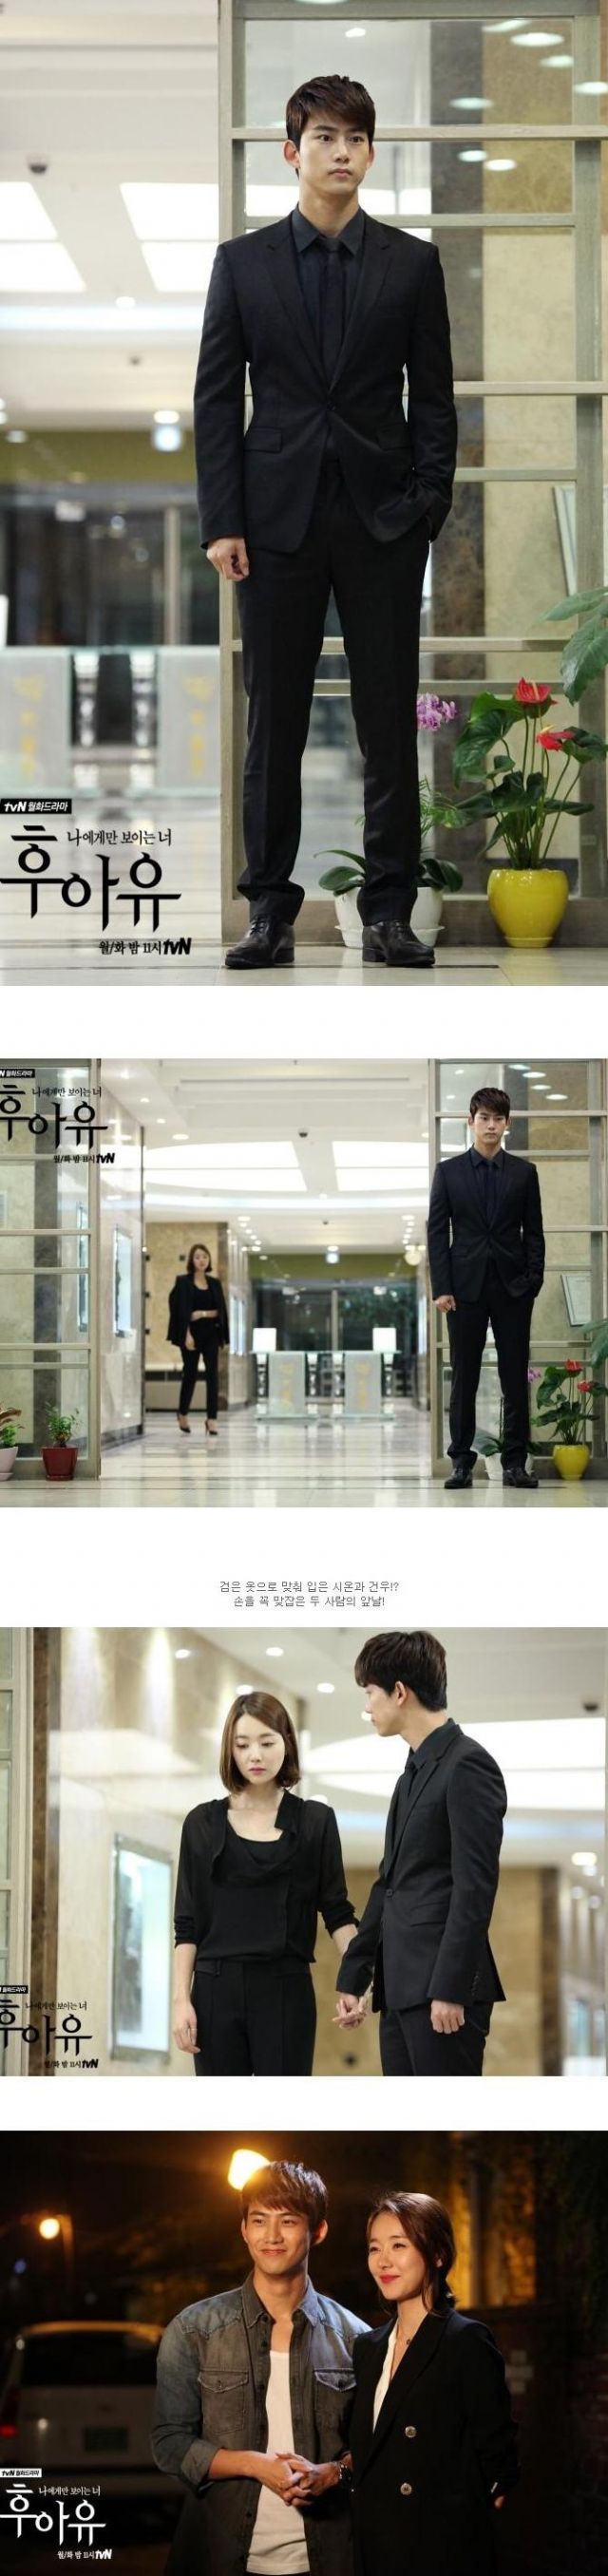 episode 16 captures for the Korean drama 'Who Are You - 2013'